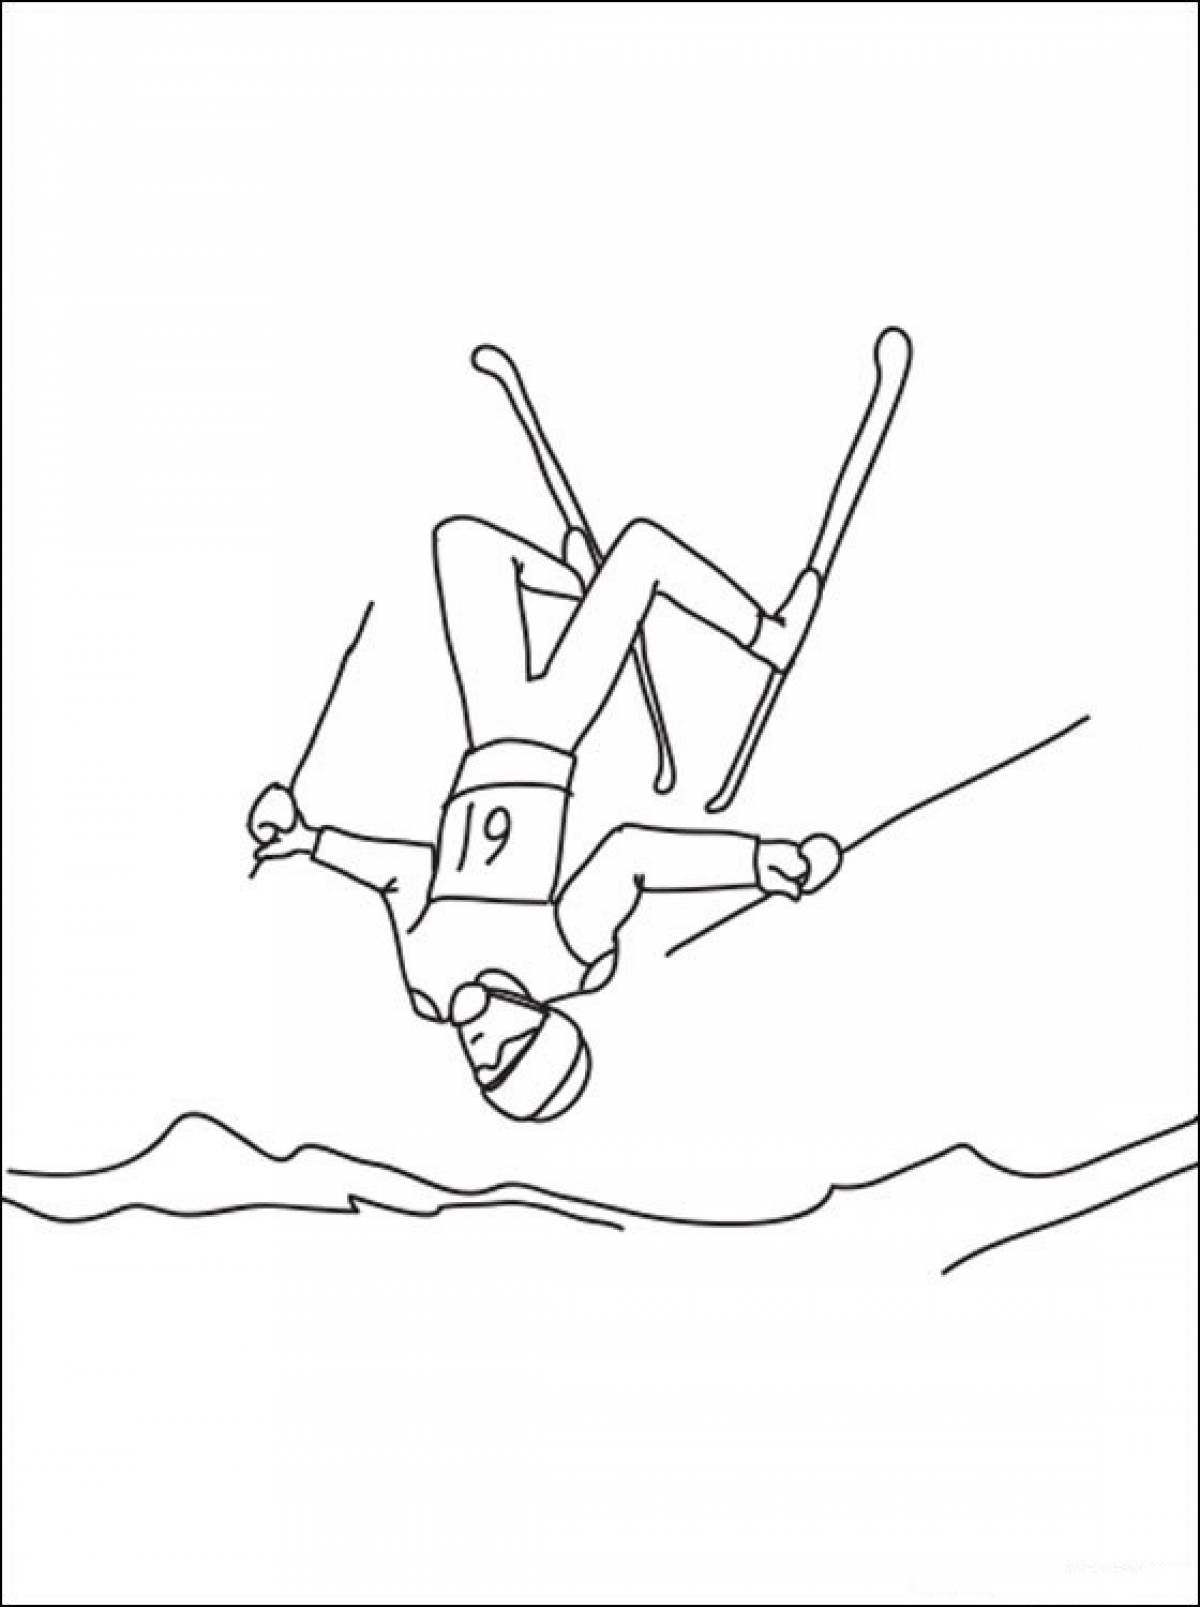 Freestyle coloring page